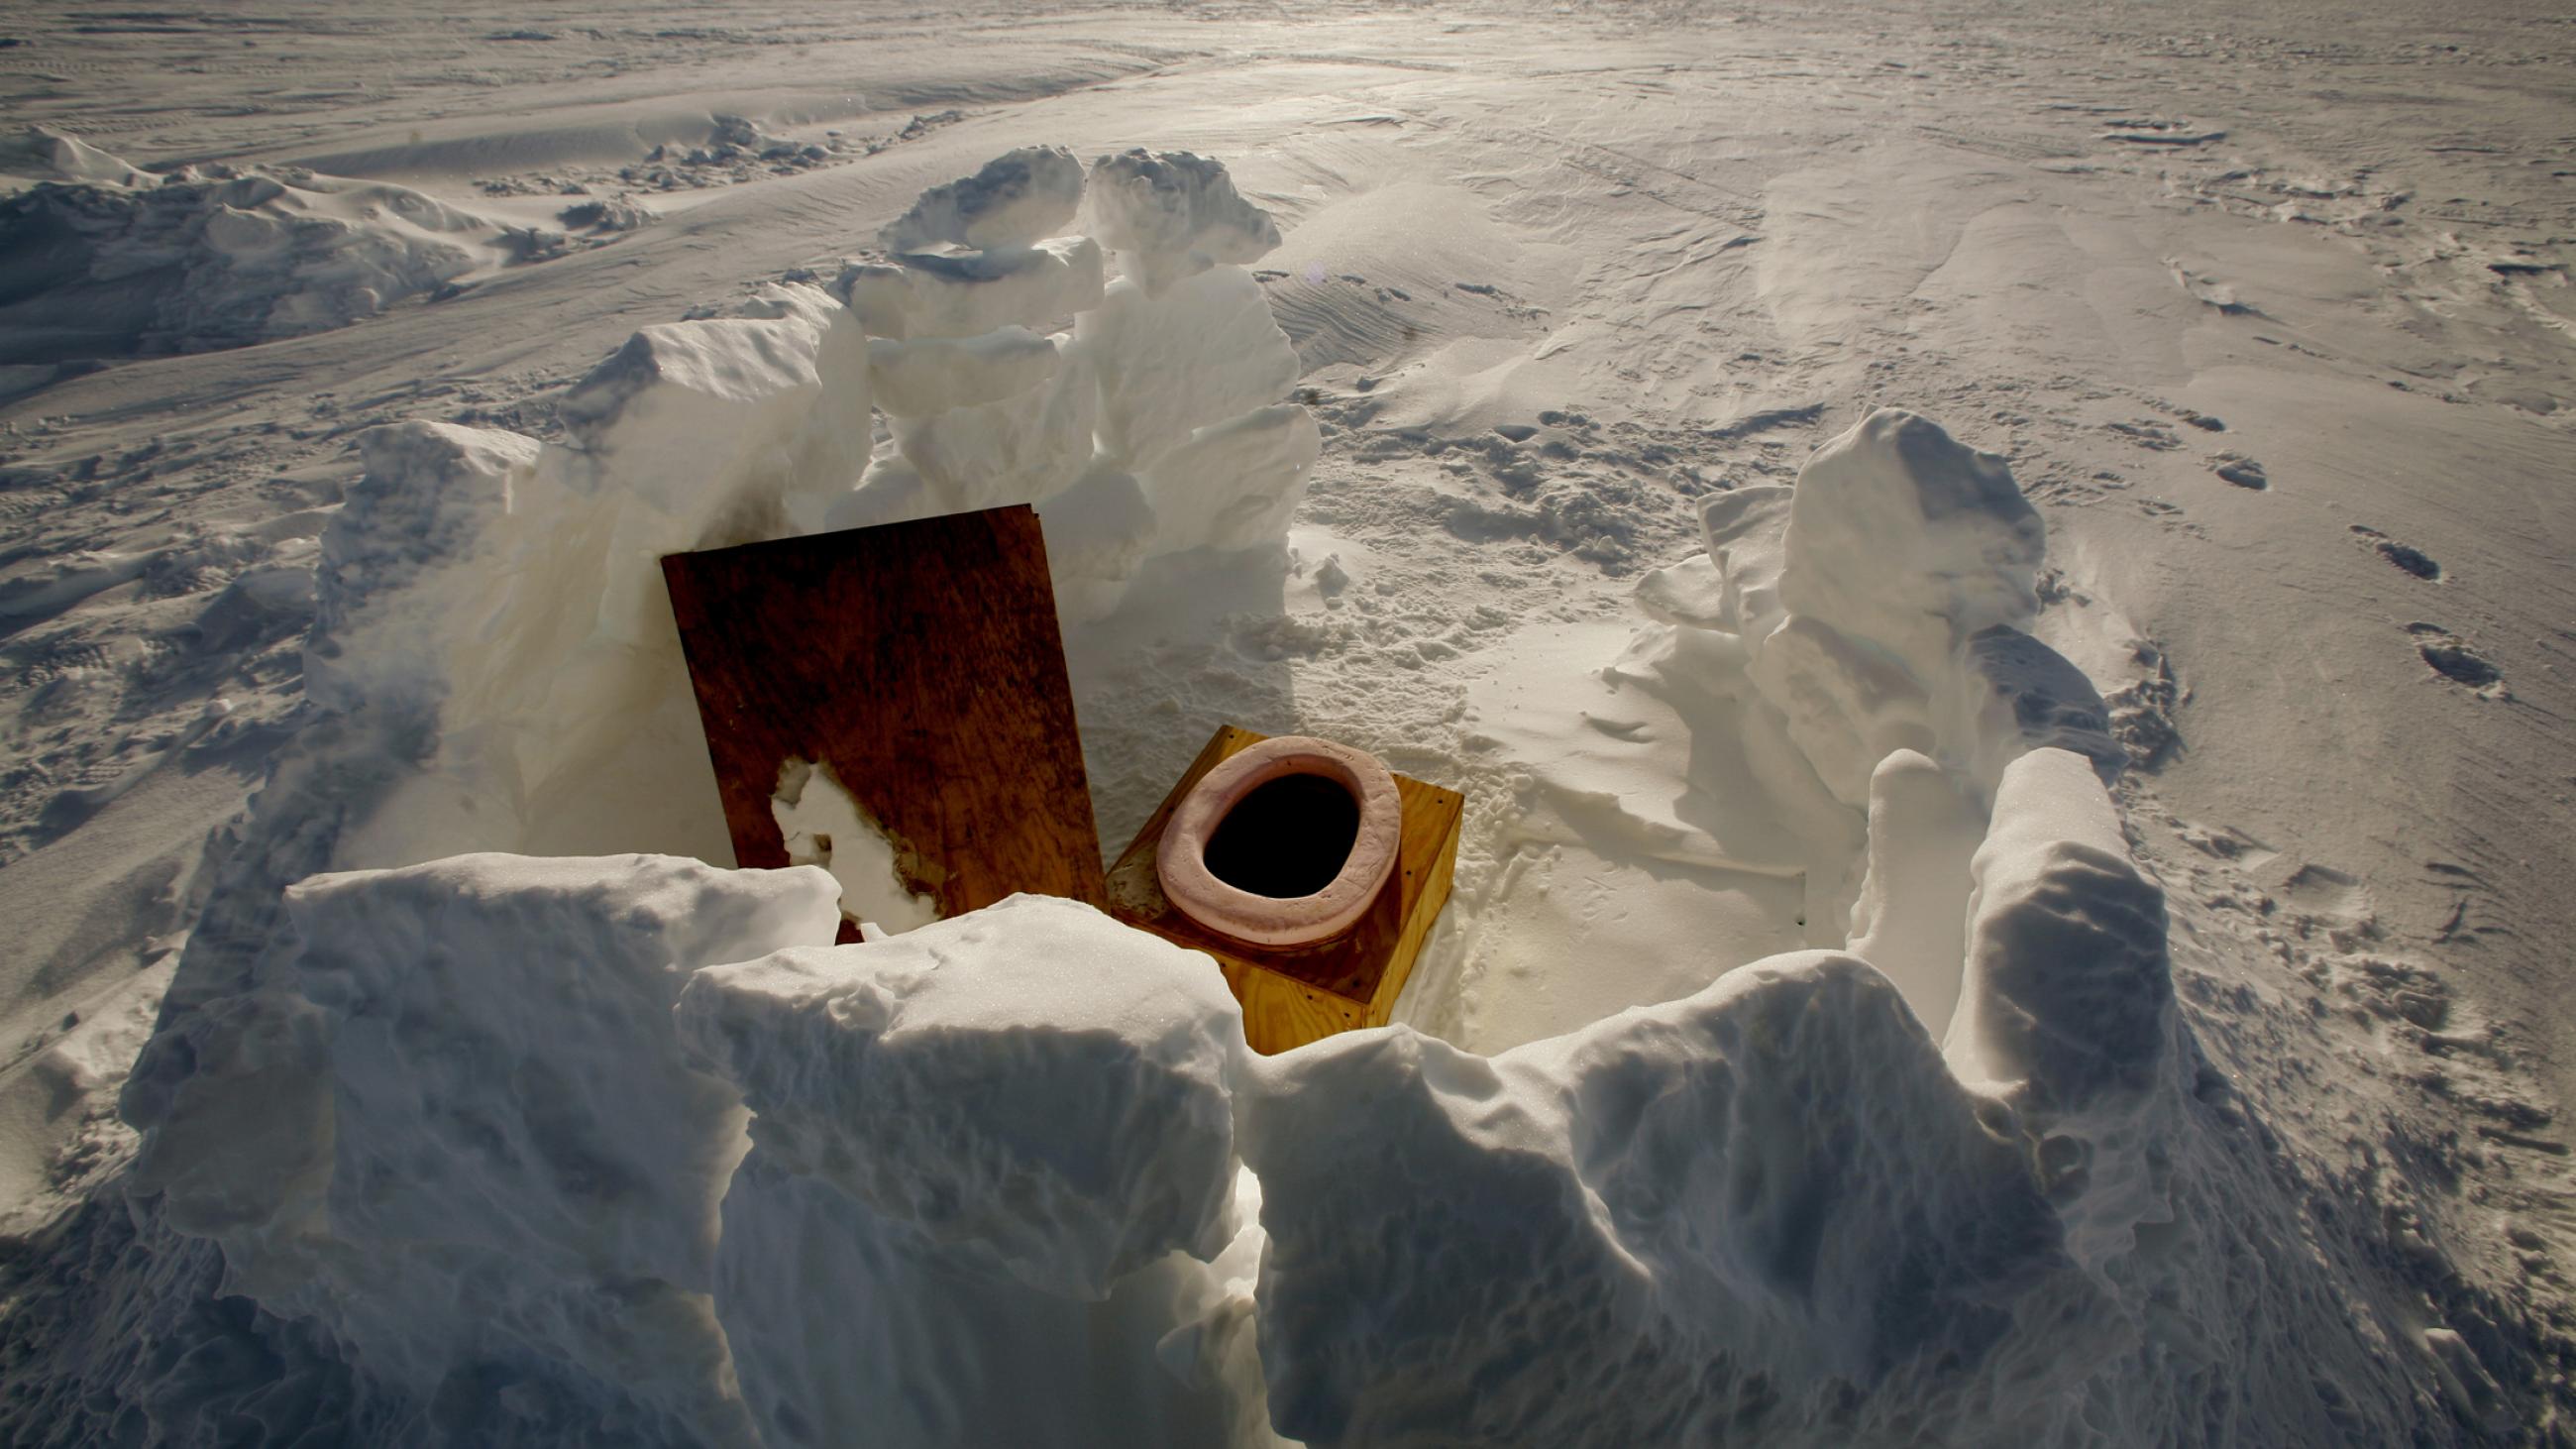 An outdoor toilet looks out over the ice at the Swiss Camp research center on the Greenland ice pack, near Ilulissat, Greenland, on May 18, 2007.